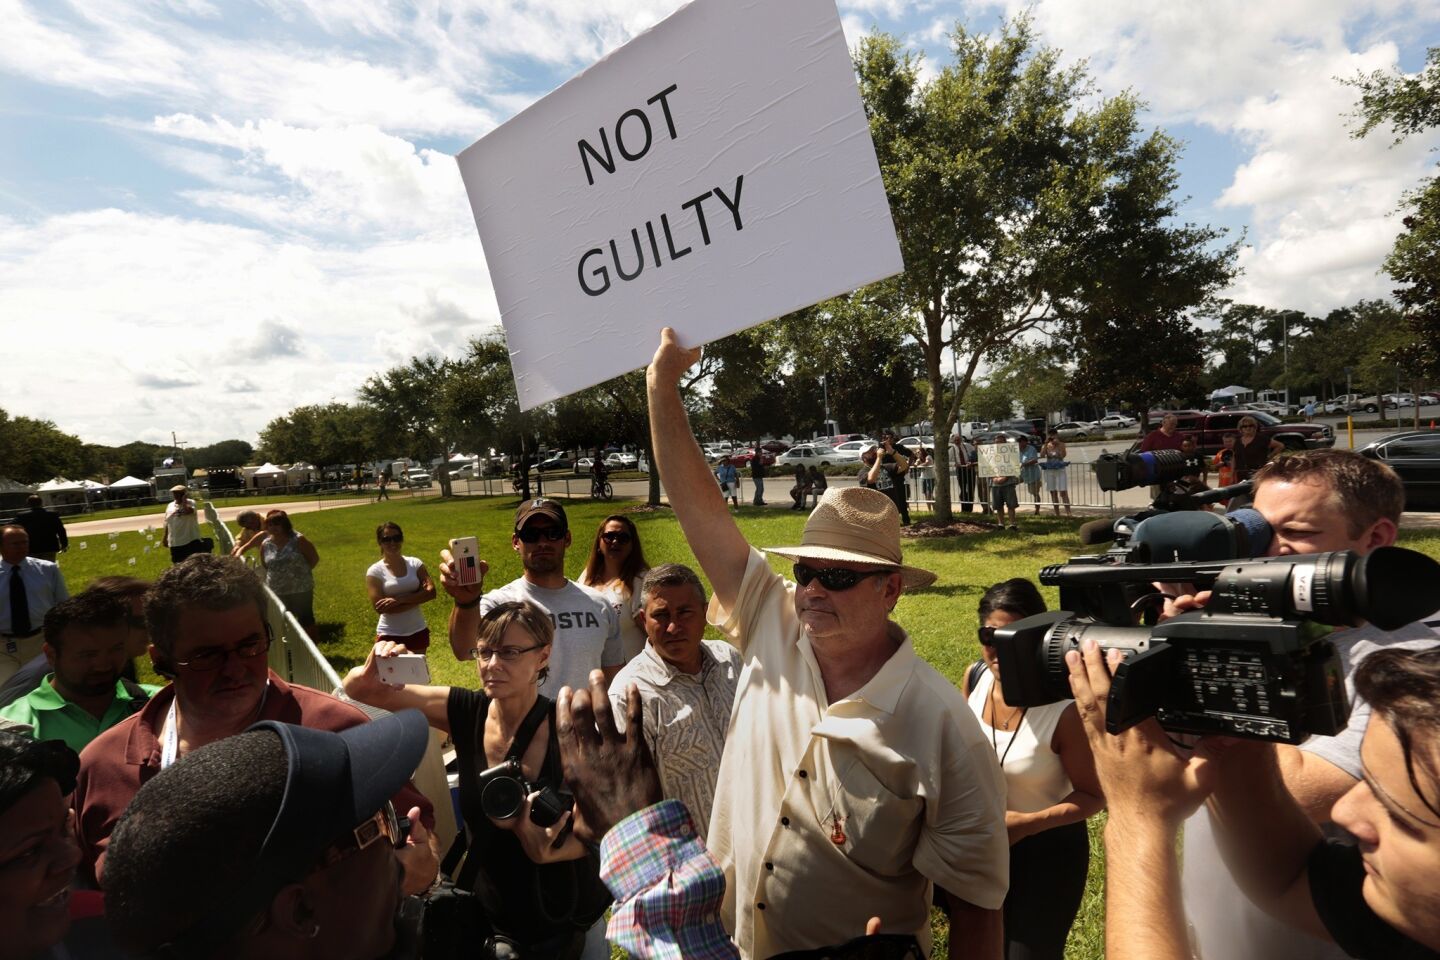 A supporter of George Zimmerman demonstrates outside the courthouse in Sanford, Fla., where a crowd awaits a jurty's verdict. Zimmerman is charged with second-degree murder in the shooting death of teenager Trayvon Marton. Zimmerman contends it was self-defense.